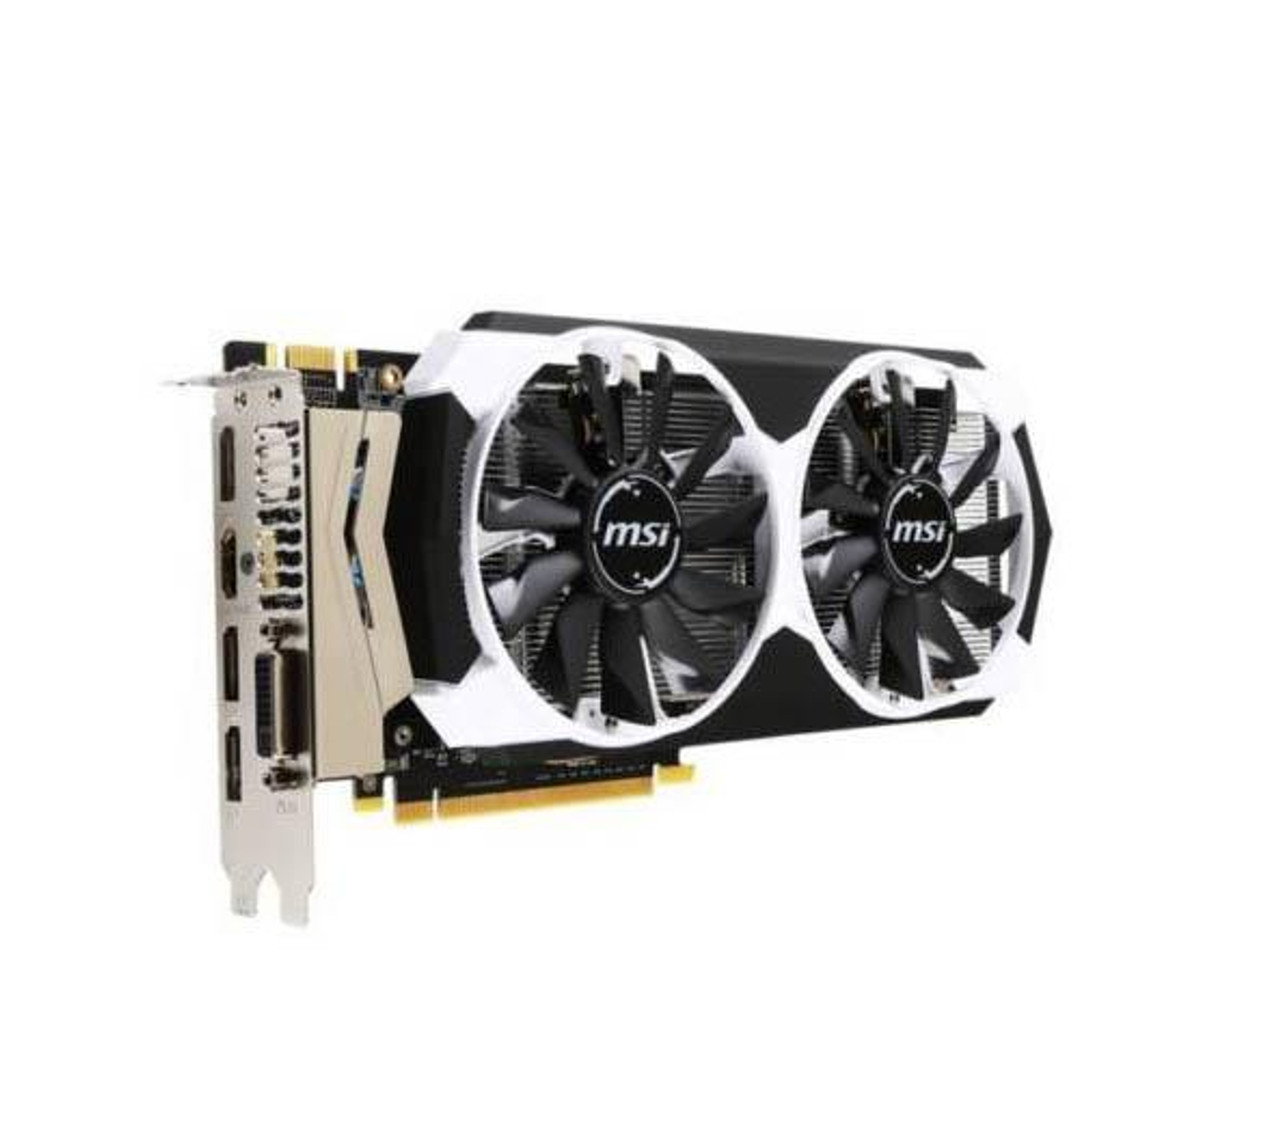 Buy Msi Nvidia Geforce Gtx 960 With A Reserve Price Up To 69 Off